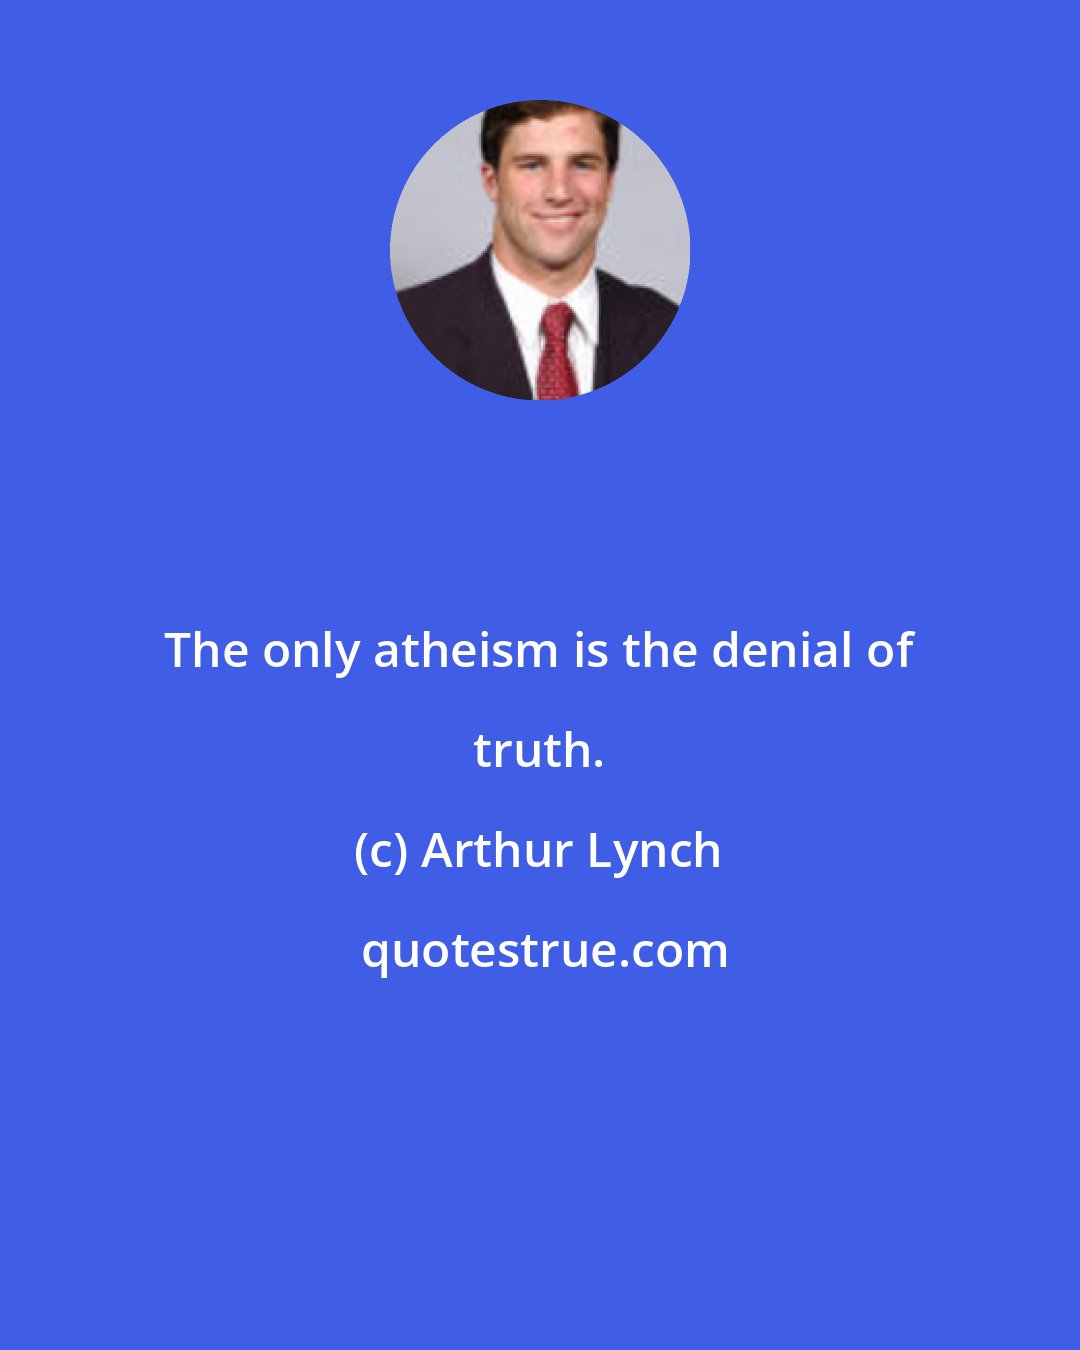 Arthur Lynch: The only atheism is the denial of truth.